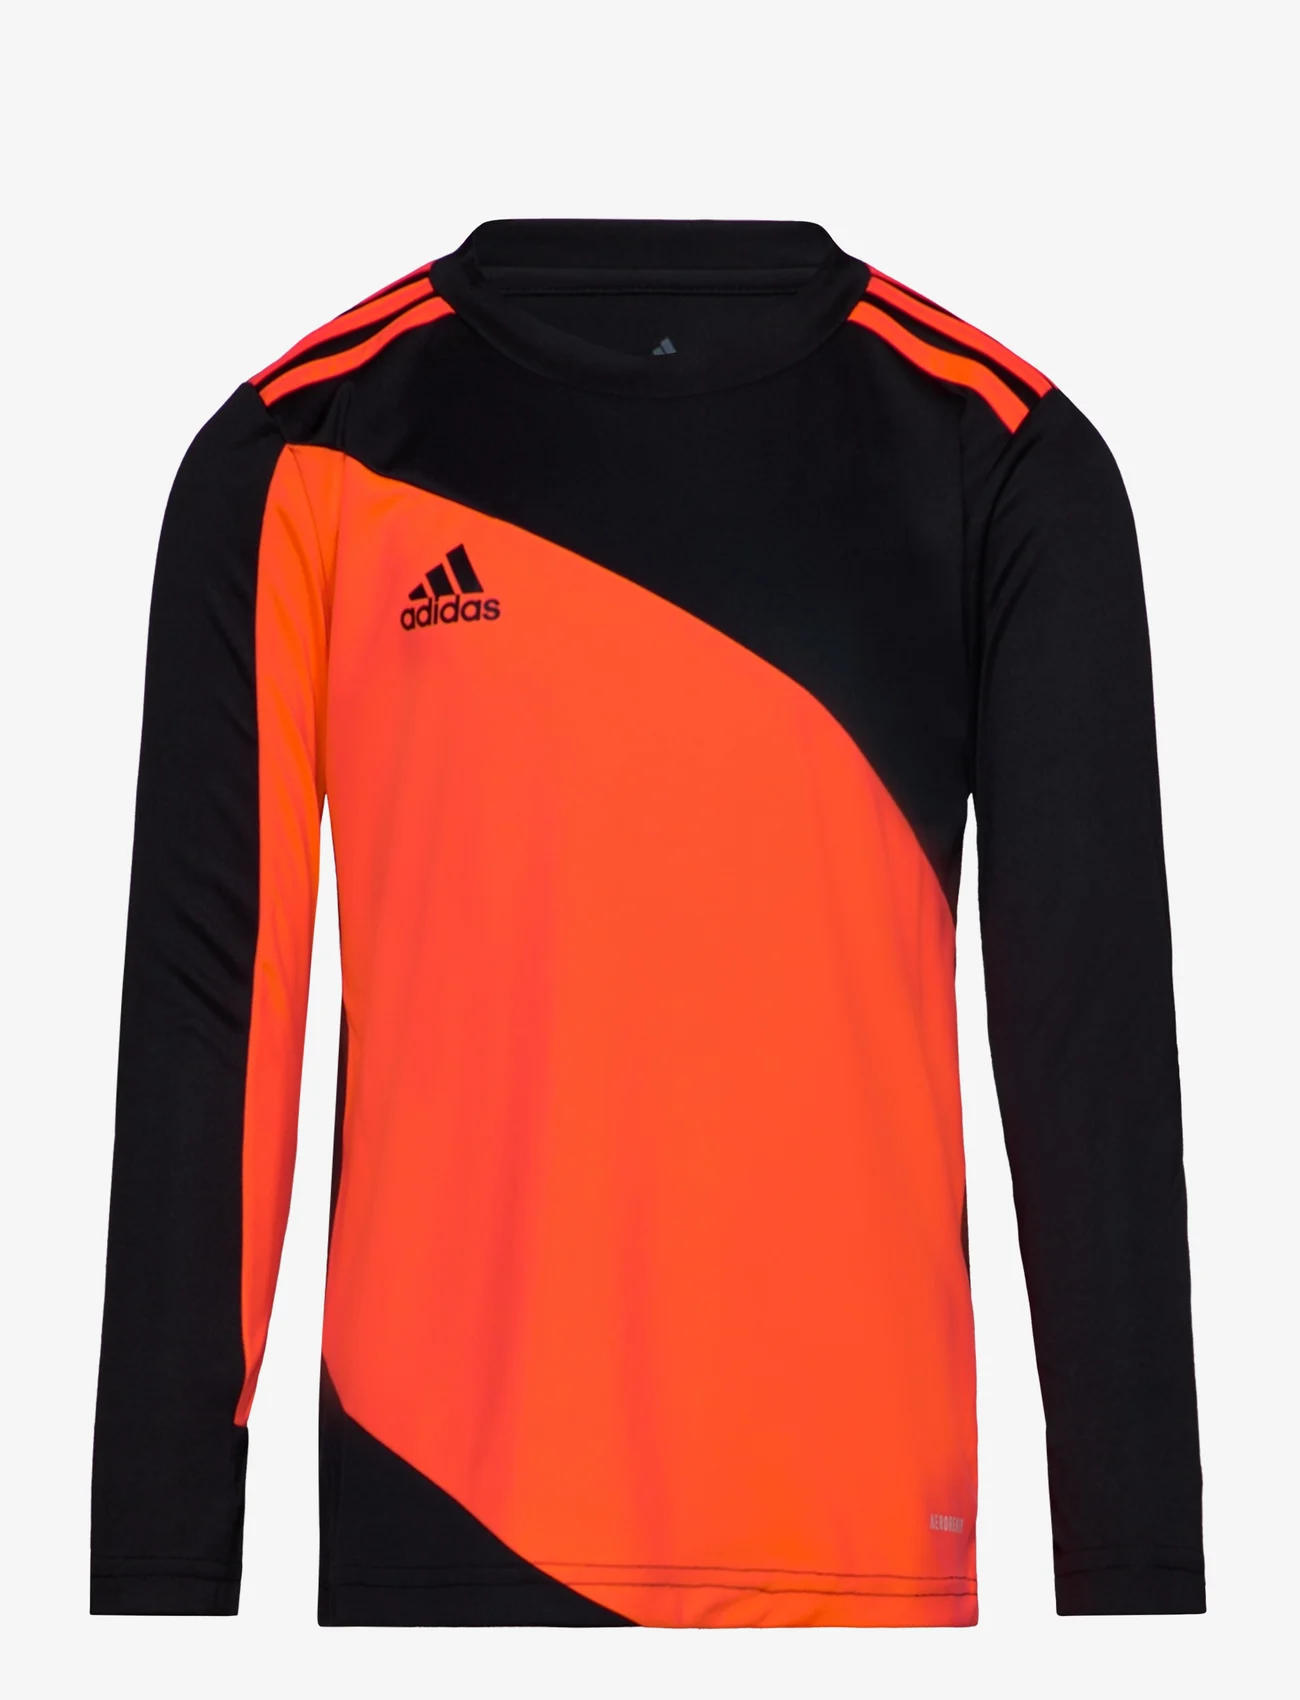 adidas Performance - SQUADRA 21 GOALKEEPER JERSEY YOUTH - long-sleeved - black/apsord - 0